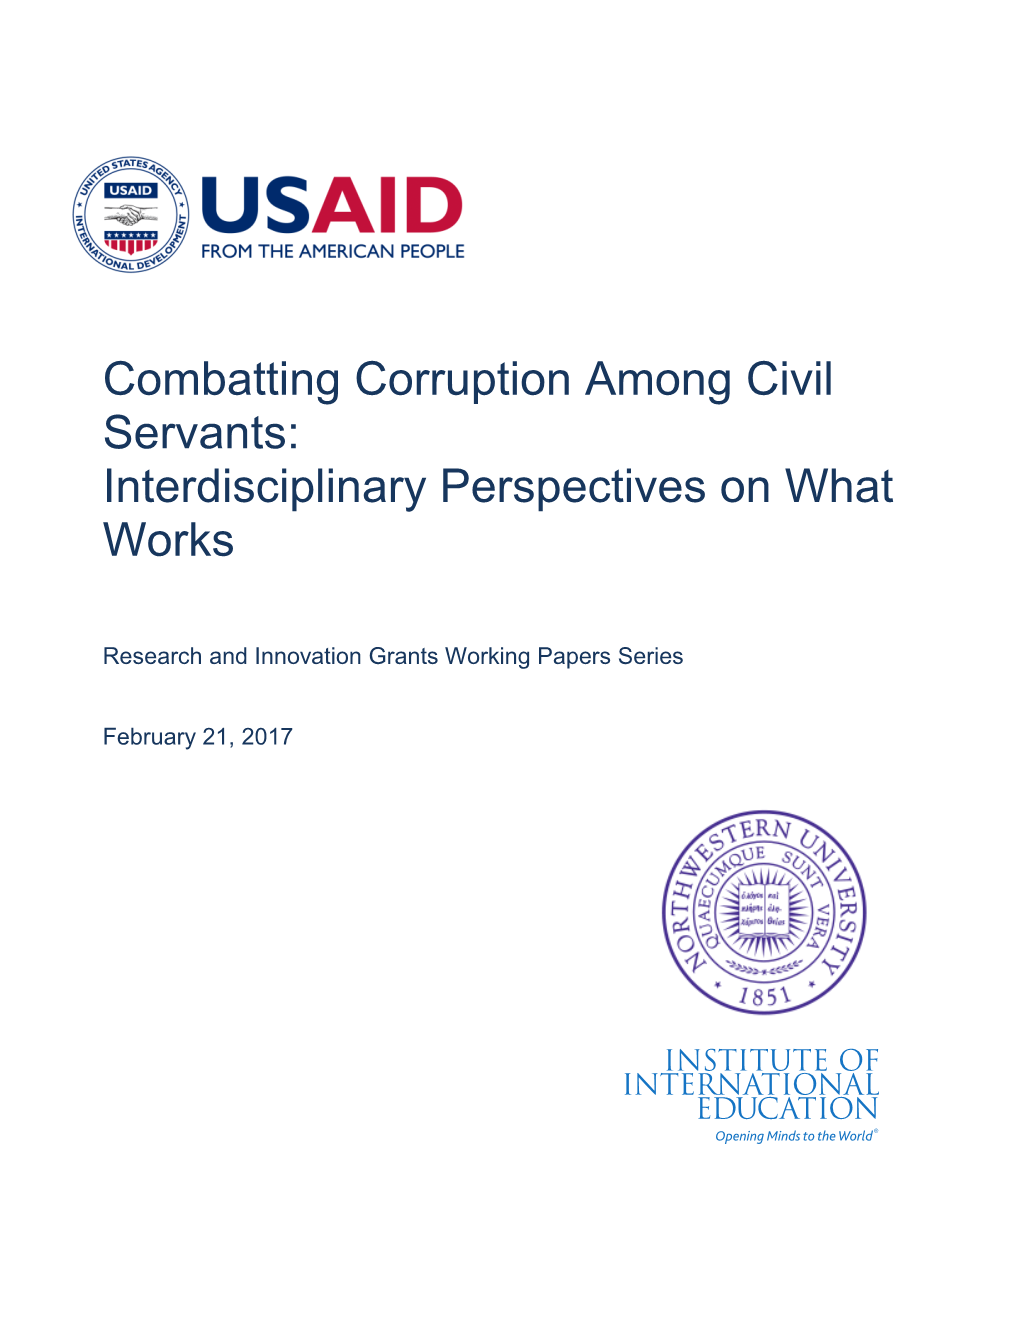 Combatting Corruption Among Civil Servants: Interdisciplinary Perspectives on What Works